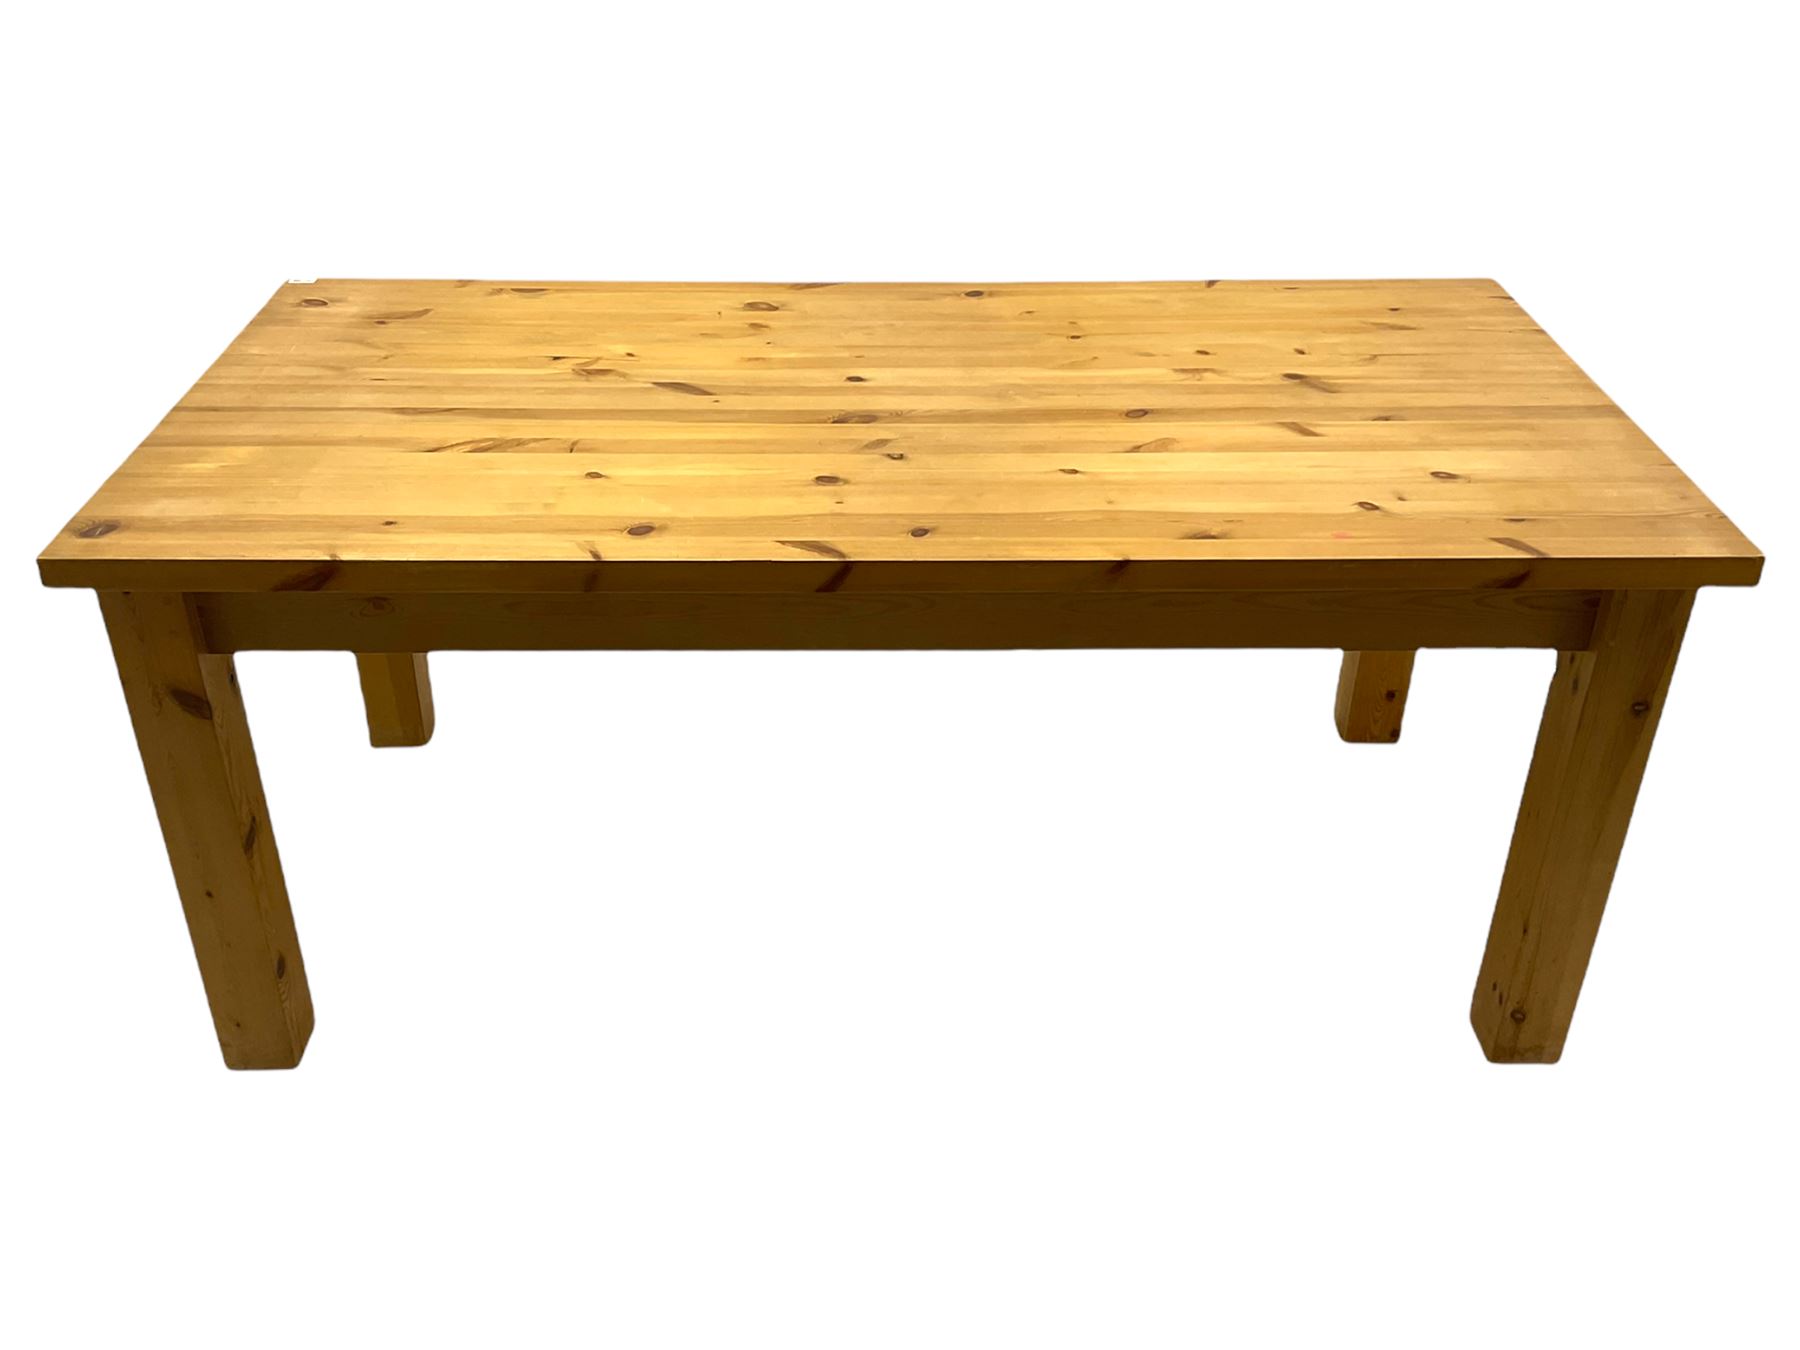 Solid pine rectangular dining table - Image 4 of 6